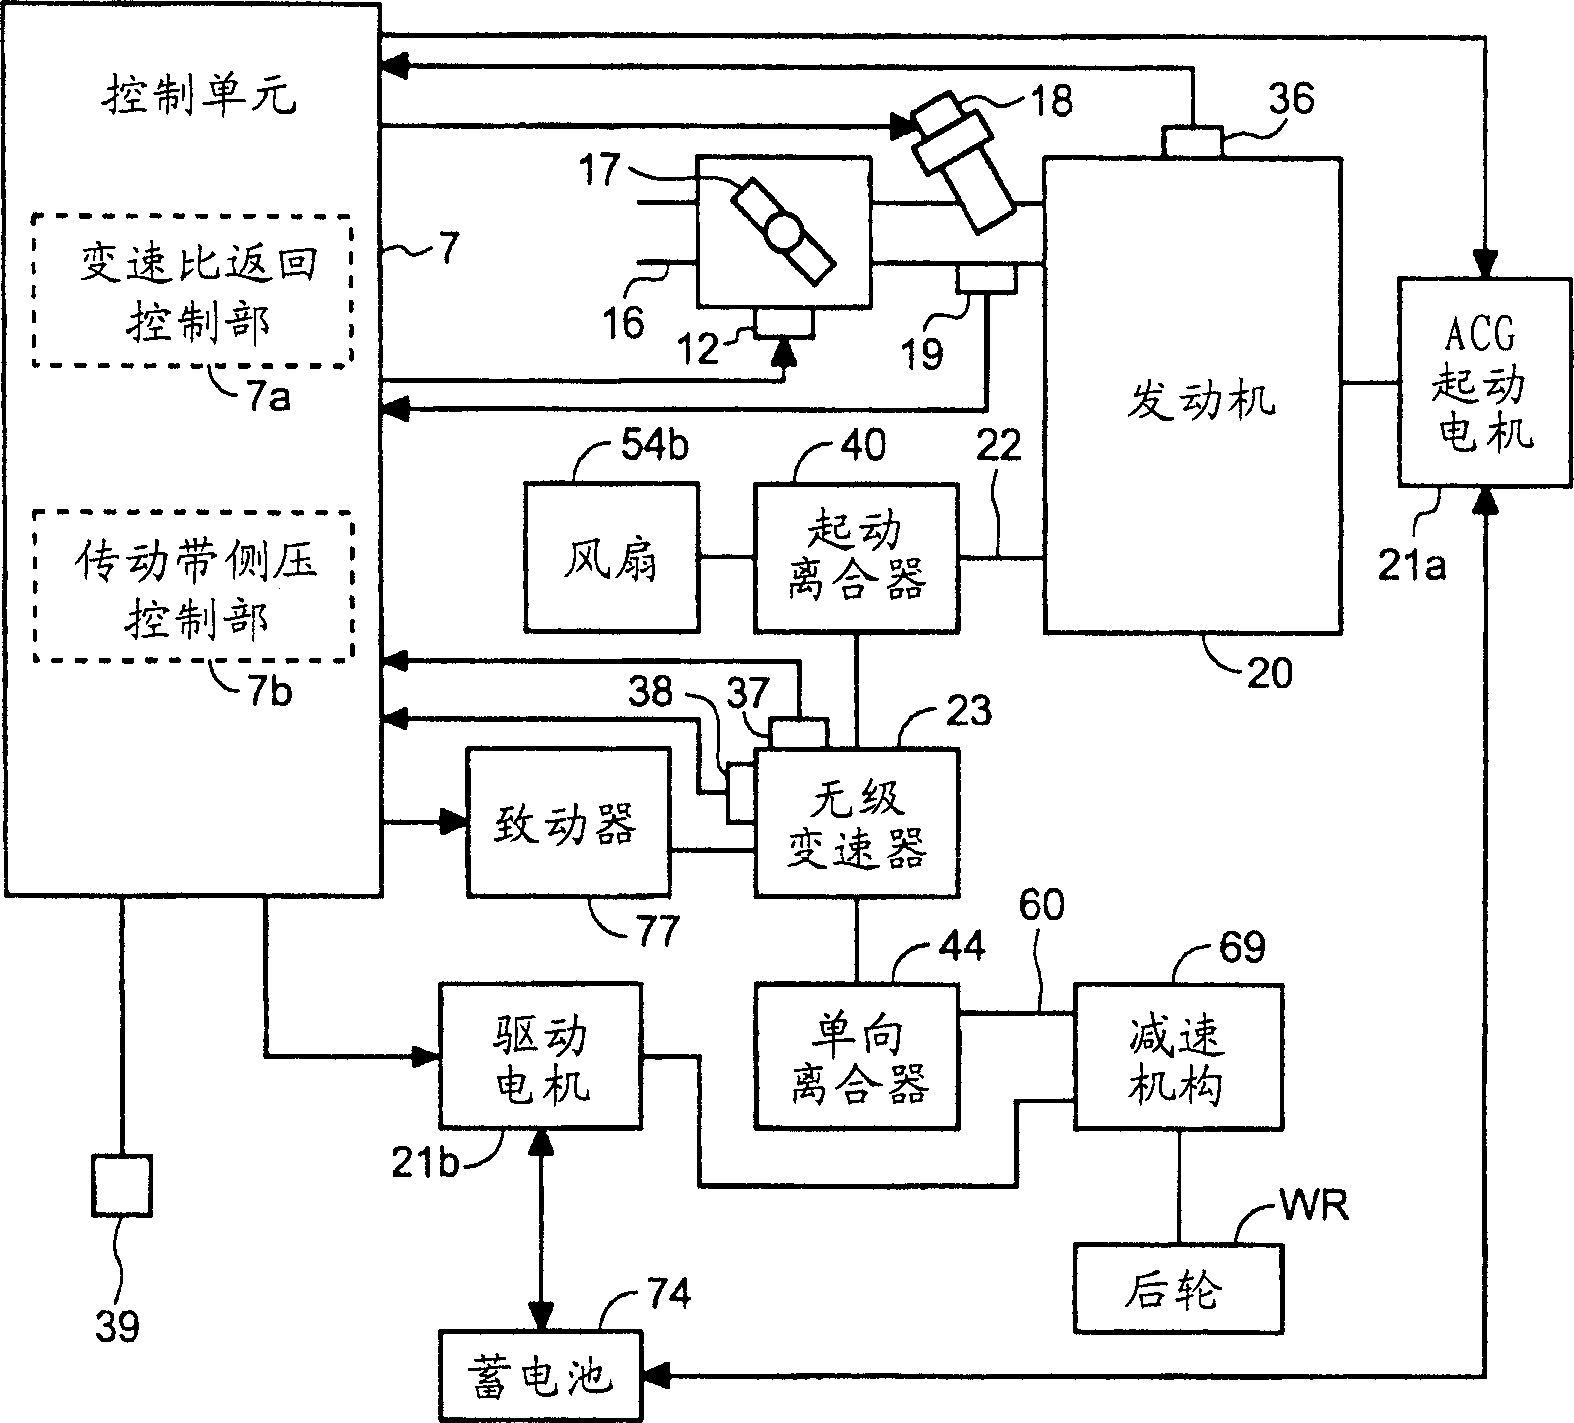 Transmission controller for continuously variable transmission system